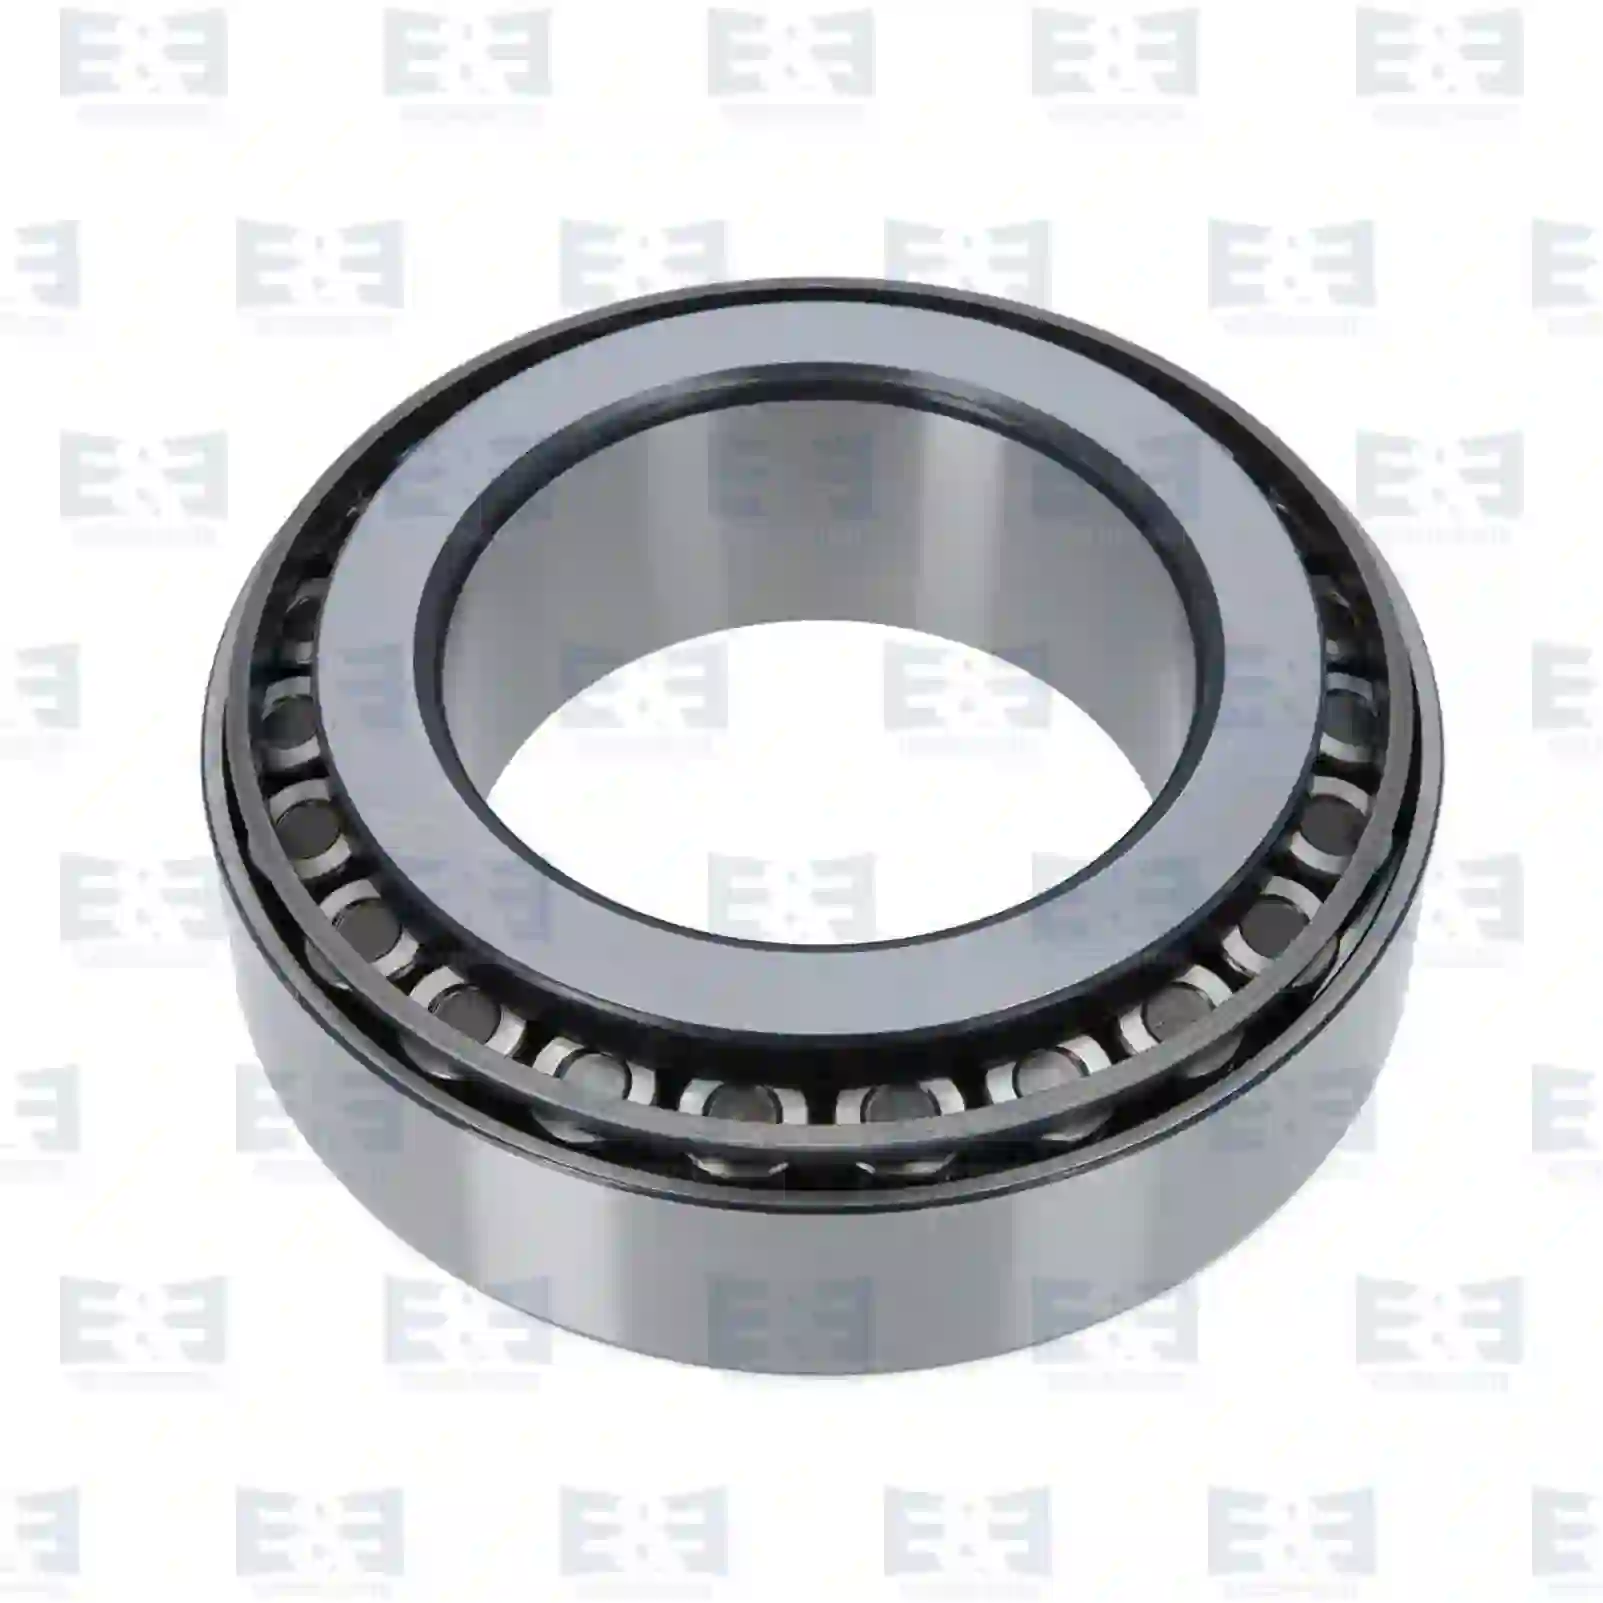 Bearings Tapered roller bearing, EE No 2E2285020 ,  oem no:0260089000, 0264089000, 0264089200, 0264102300, 07074945, 07174945, 10500582, 710500582, 07074945, 07174945, 42103253, 7174945, 86650, 06324906500, 81440500073, 4200100900, 014440, ZG02980-0008 E&E Truck Spare Parts | Truck Spare Parts, Auotomotive Spare Parts